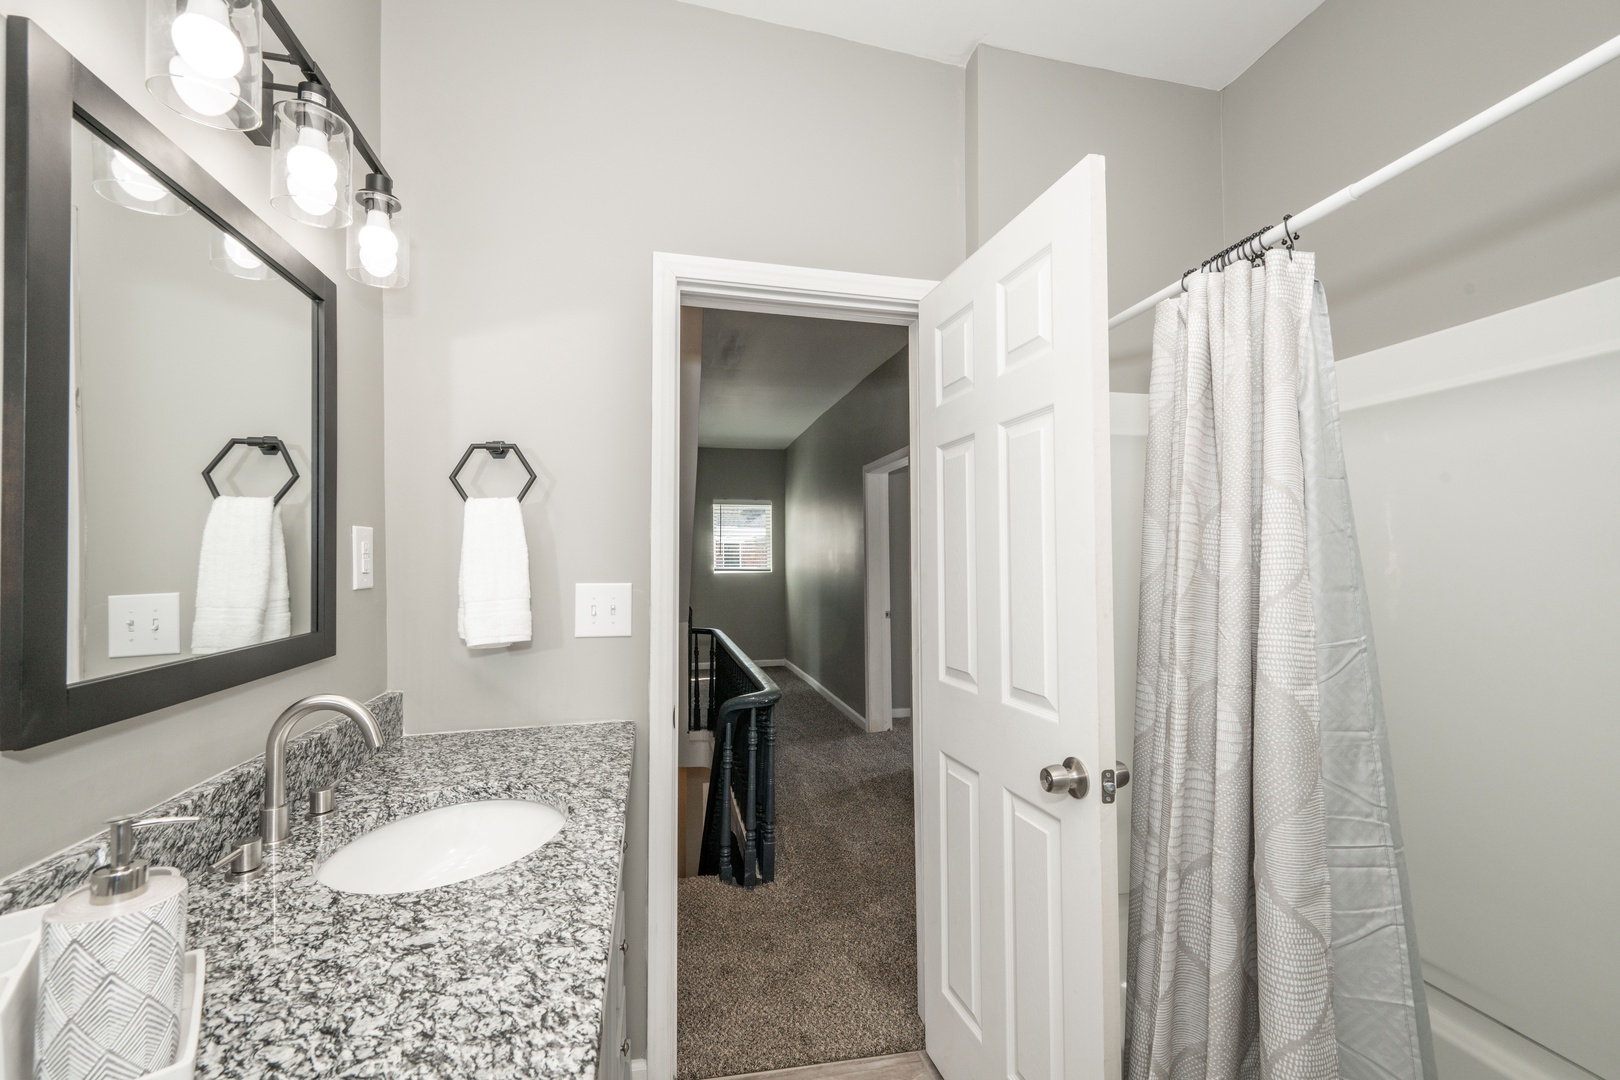 The 2nd floor full bath offers a spacious single vanity & shower/tub combo